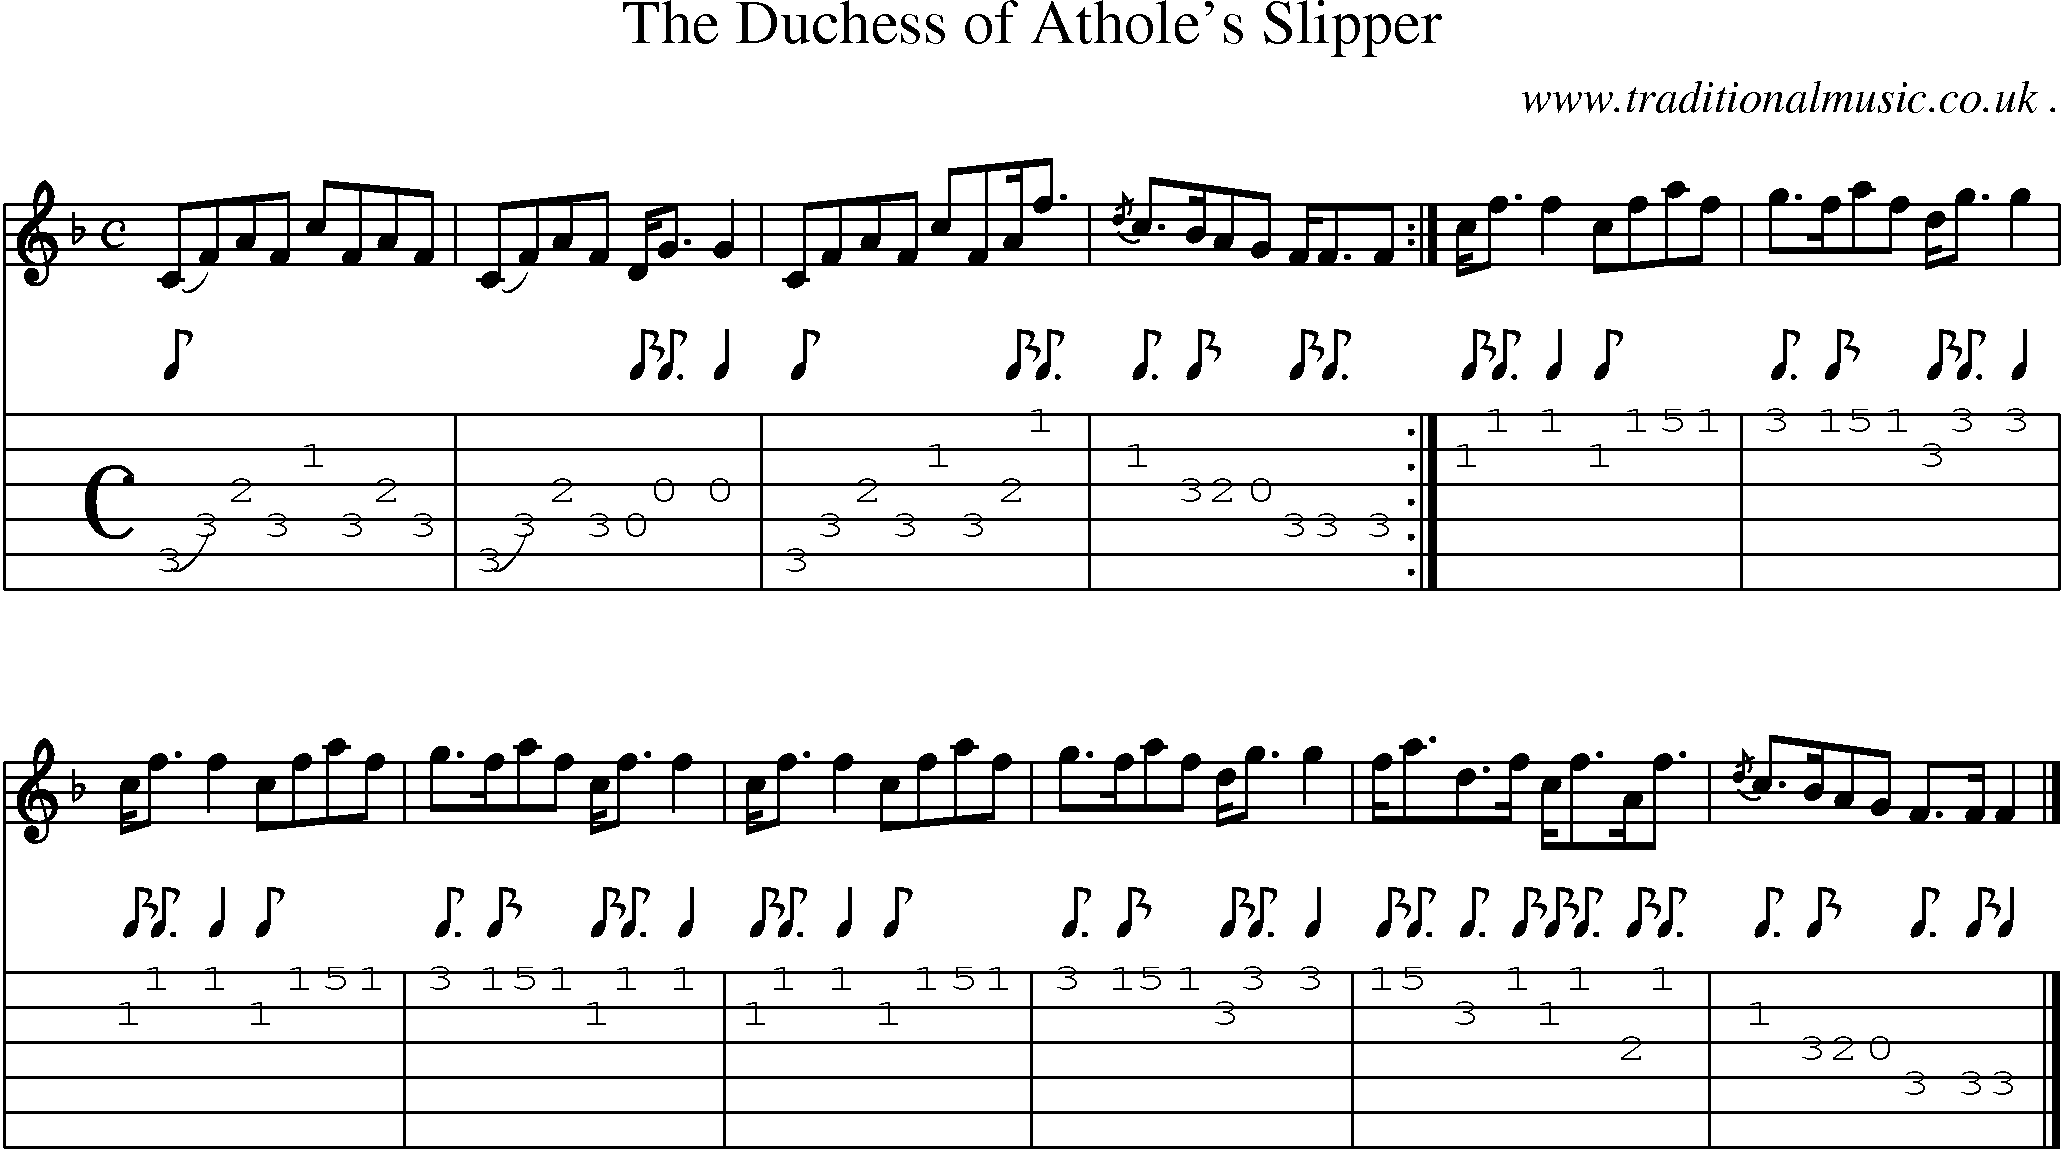 Sheet-music  score, Chords and Guitar Tabs for The Duchess Of Atholes Slipper